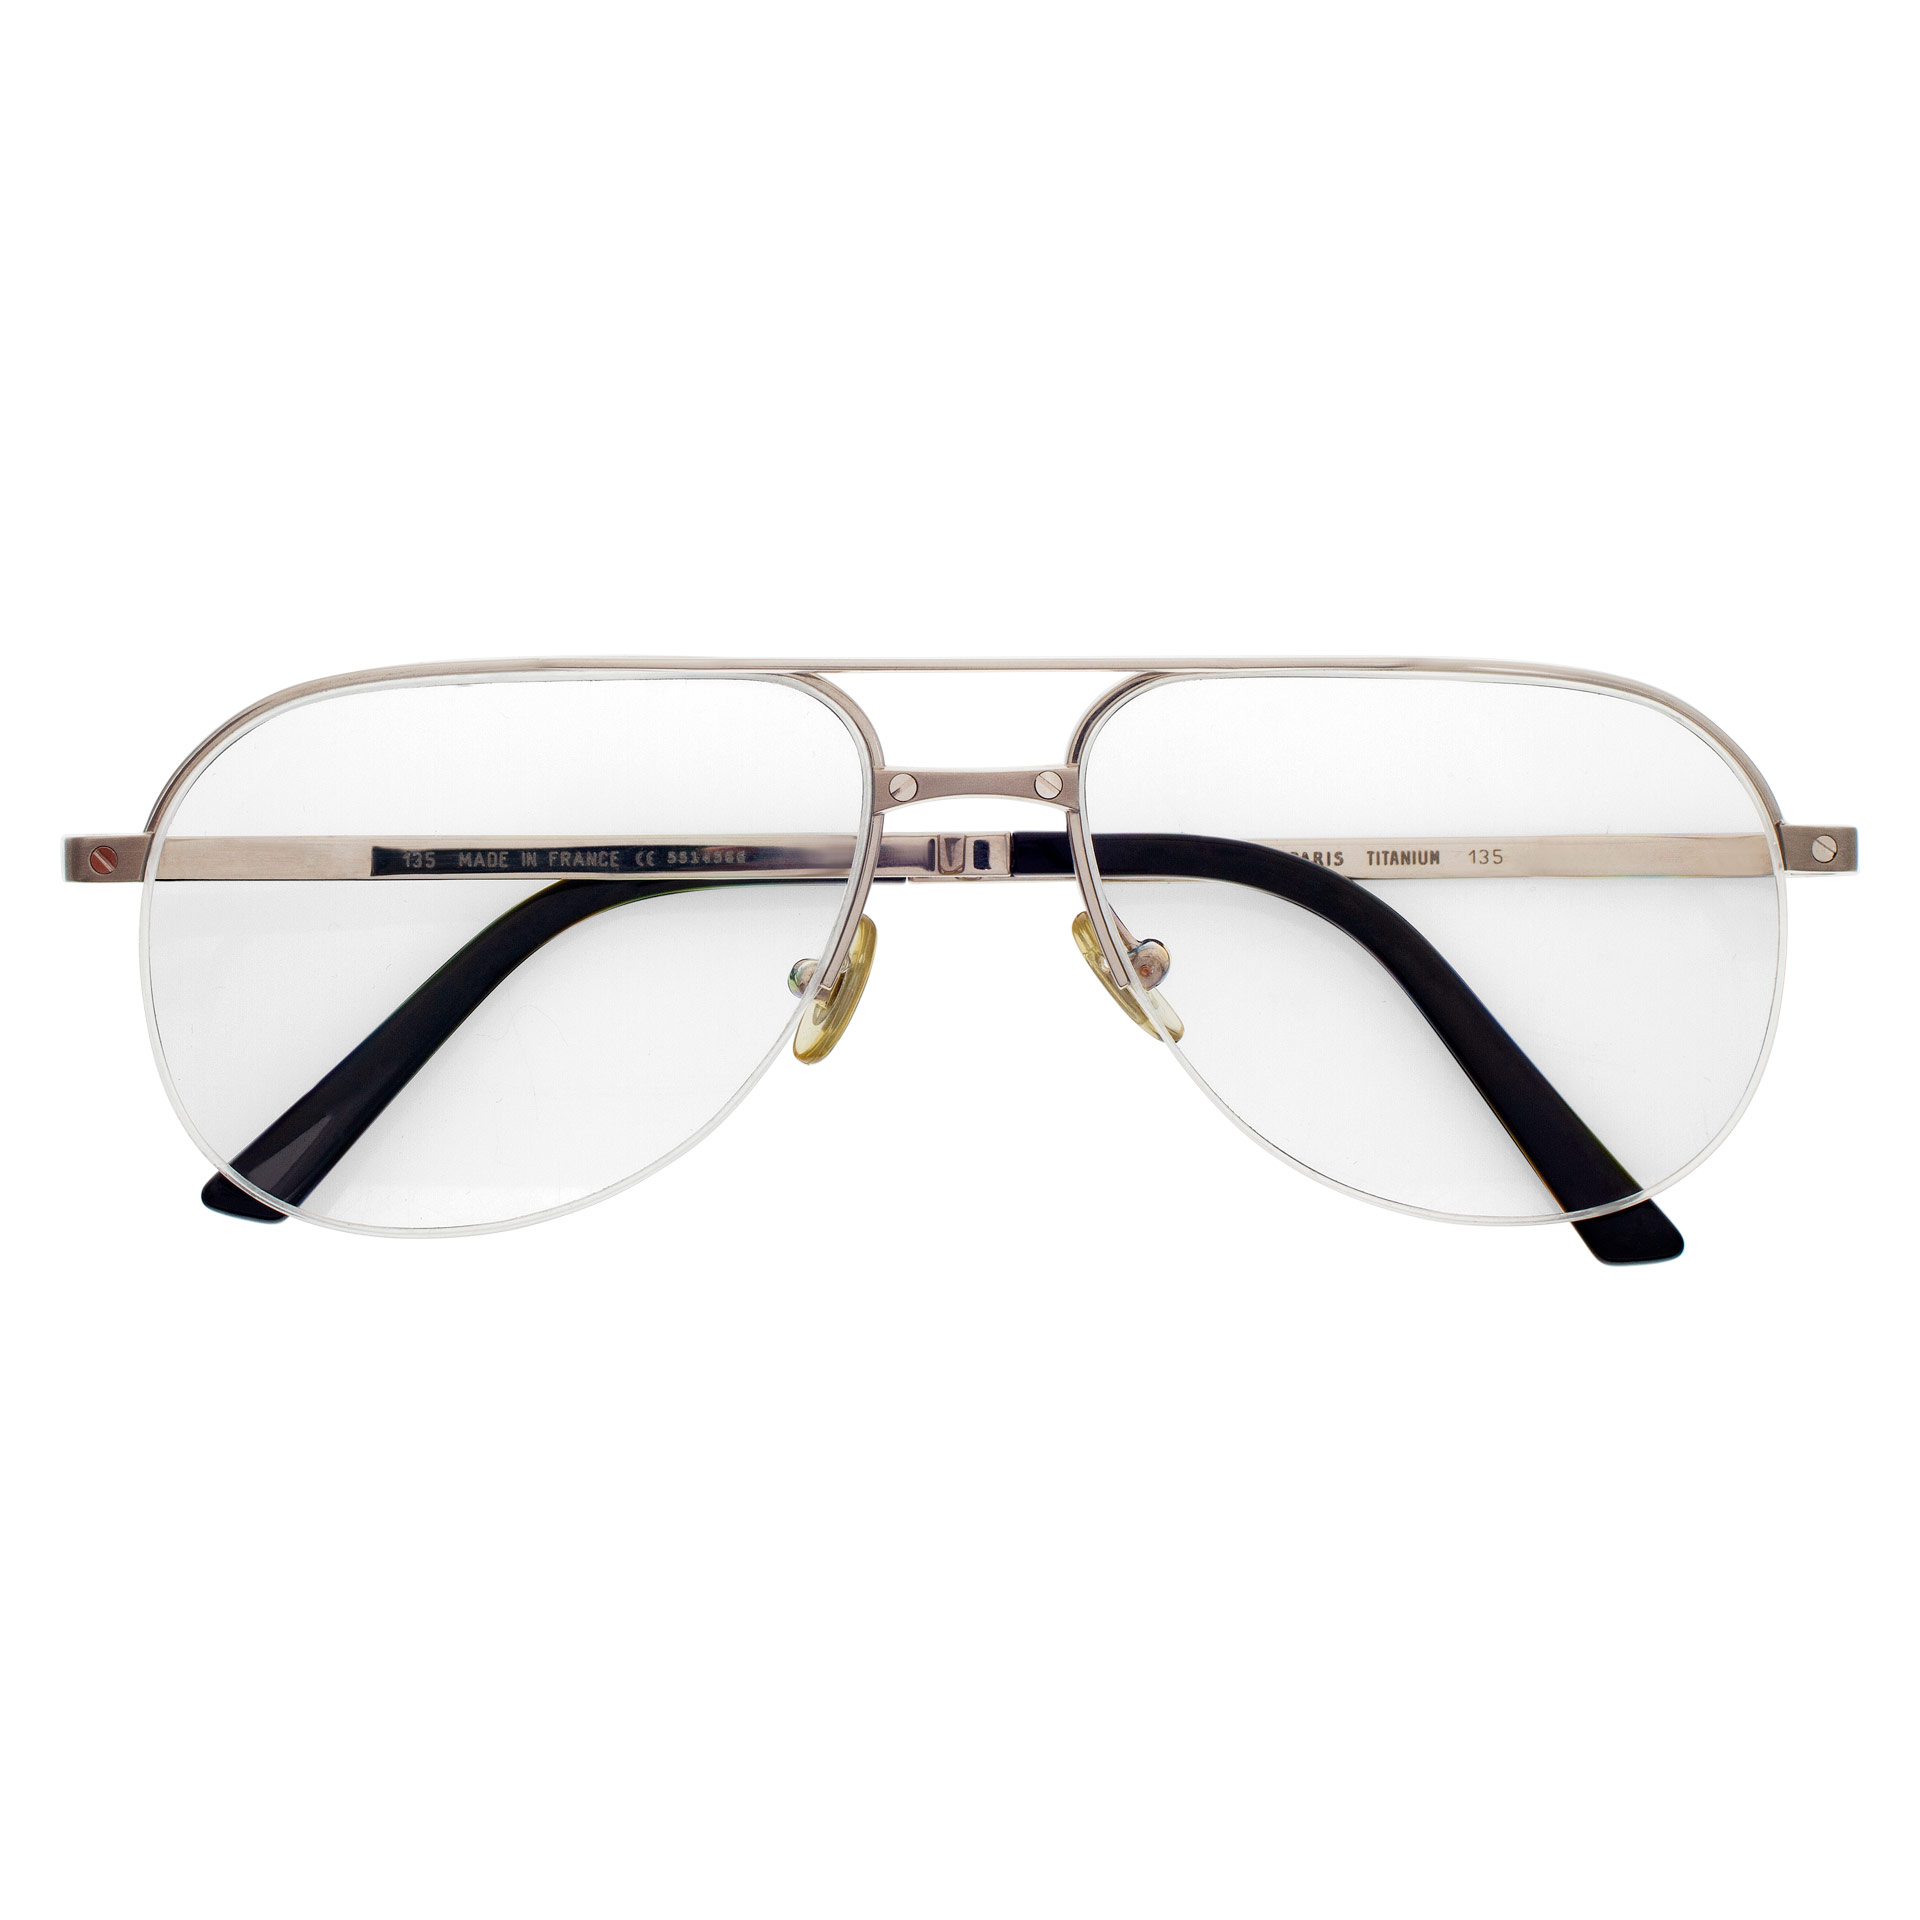 Cartier glasses stainless steel frame image 1